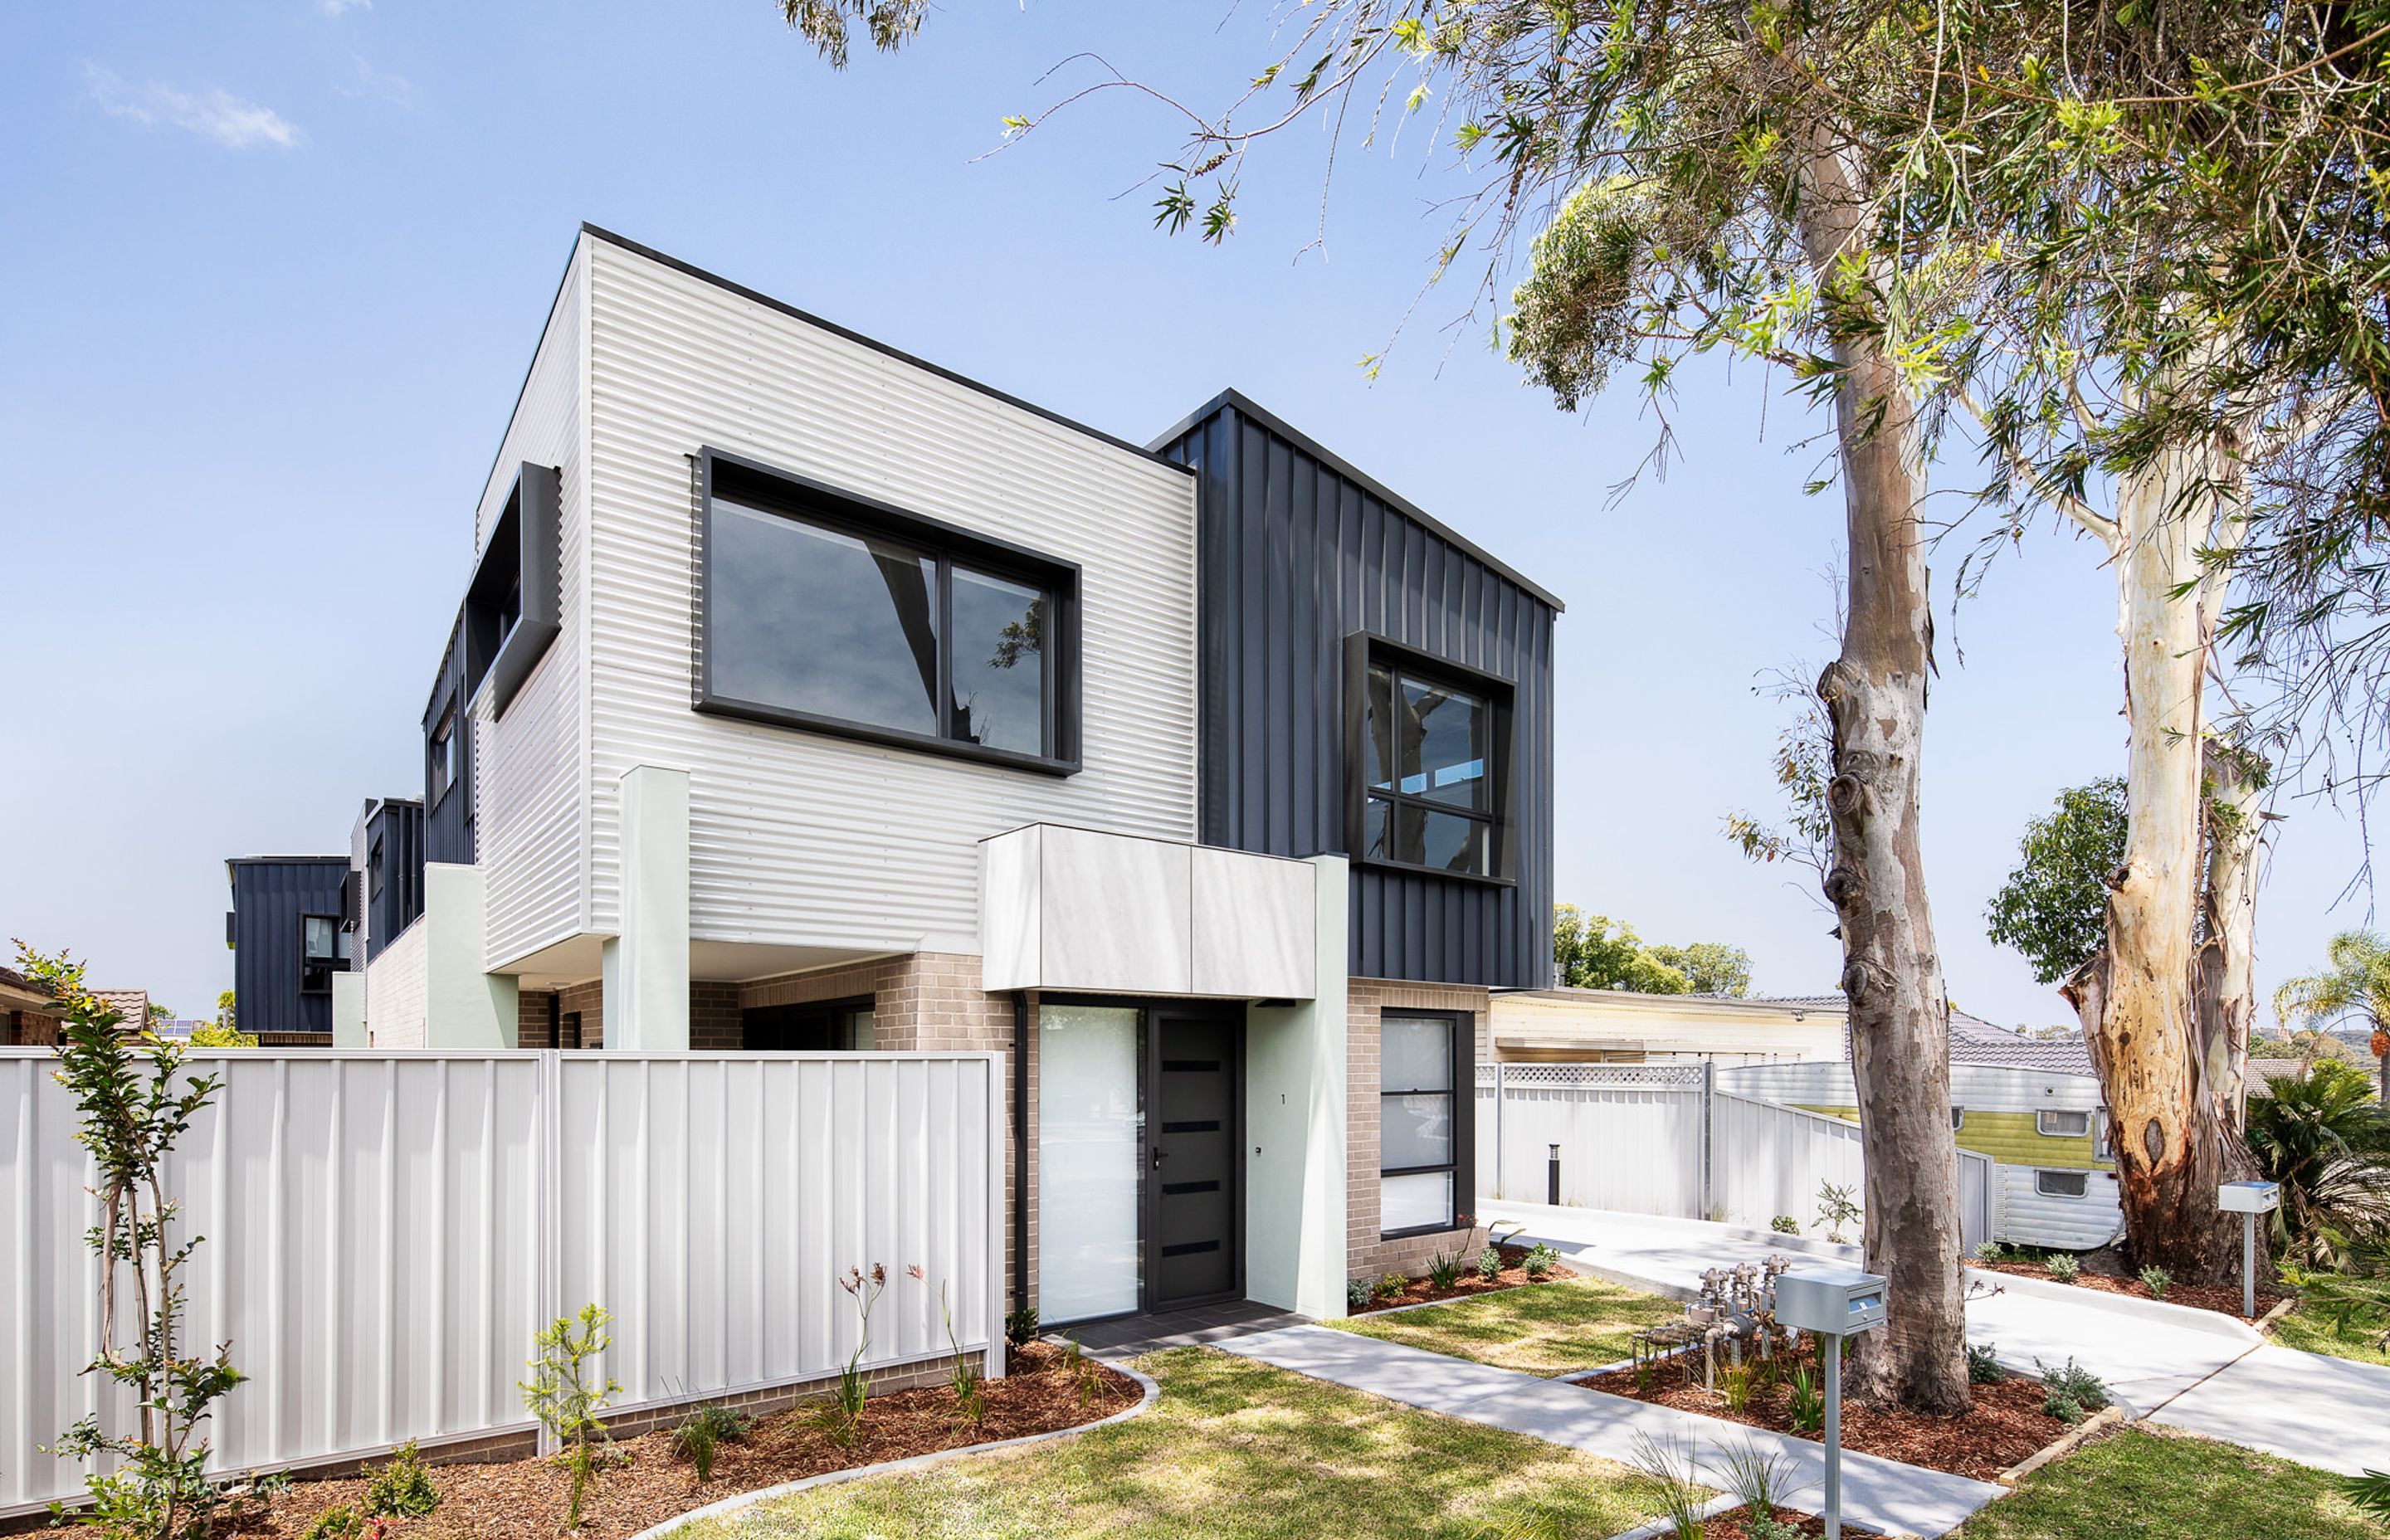 A black and white exterior strikes a bold note, yet its simplicity leaves ample scope for future design modifications. Featured project: Athol Street by Evan Maclean